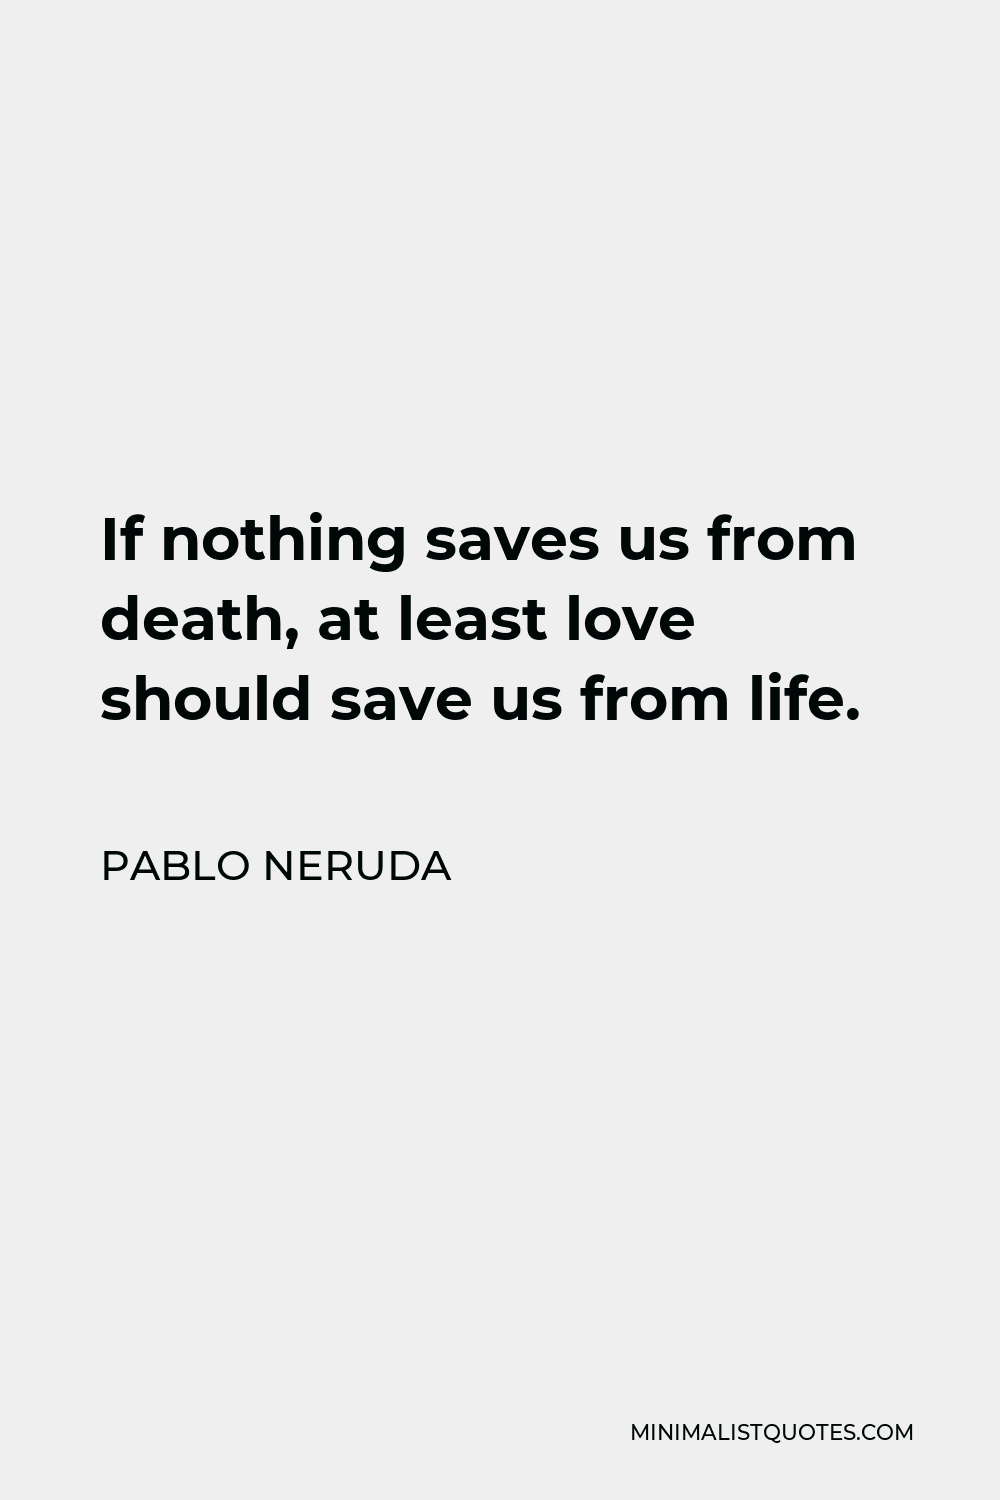 Pablo Neruda Quote - If nothing saves us from death, at least love should save us from life.